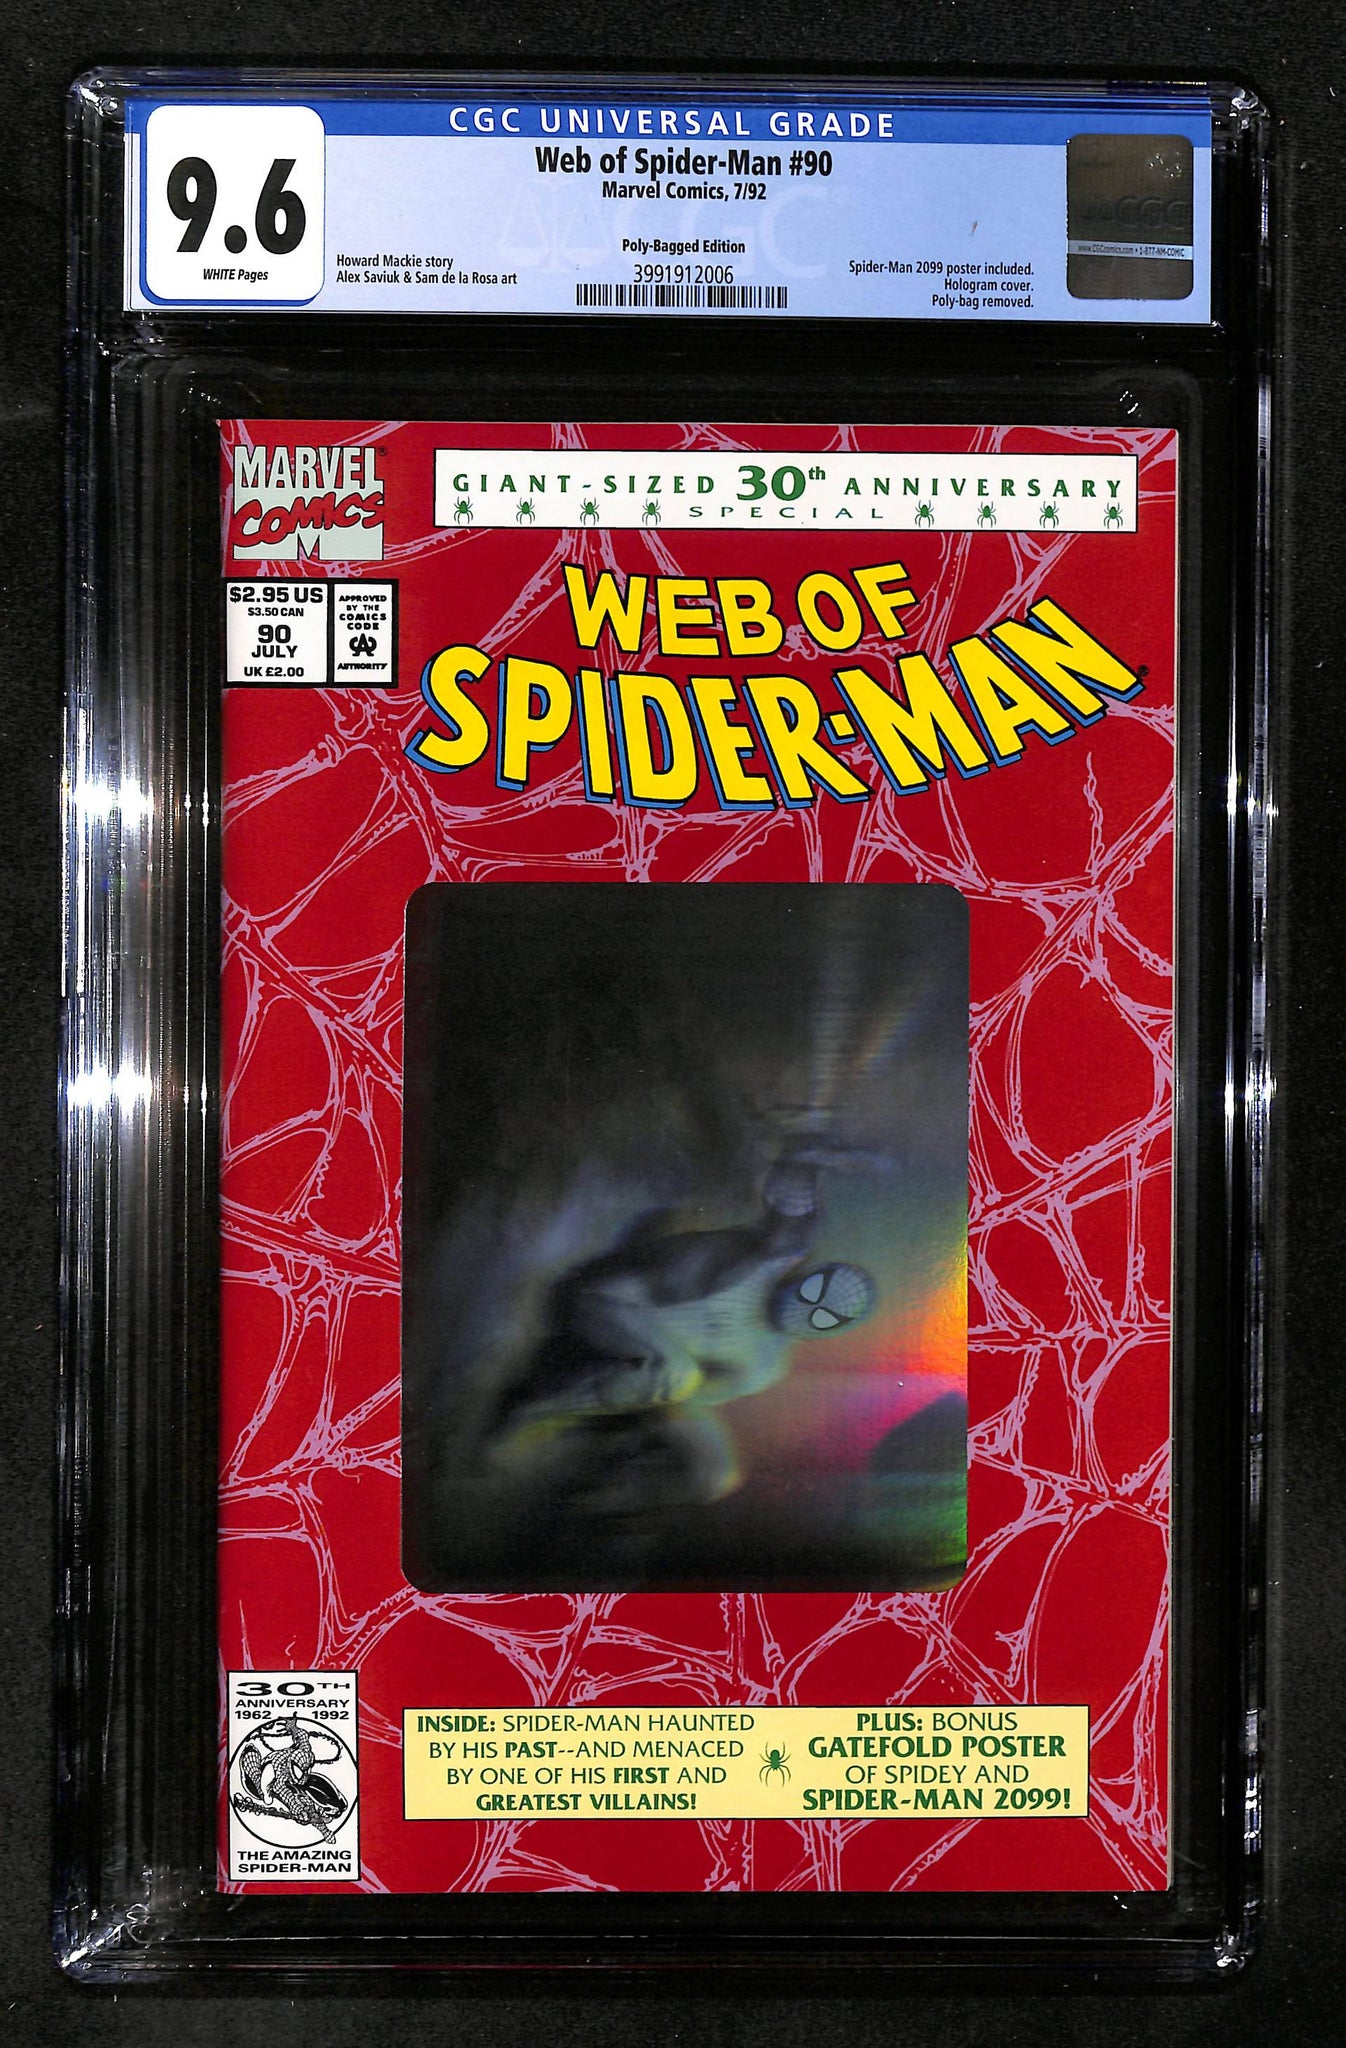 Web of Spider-Man #90 CGC 9.6 Poly-Bagged Edition